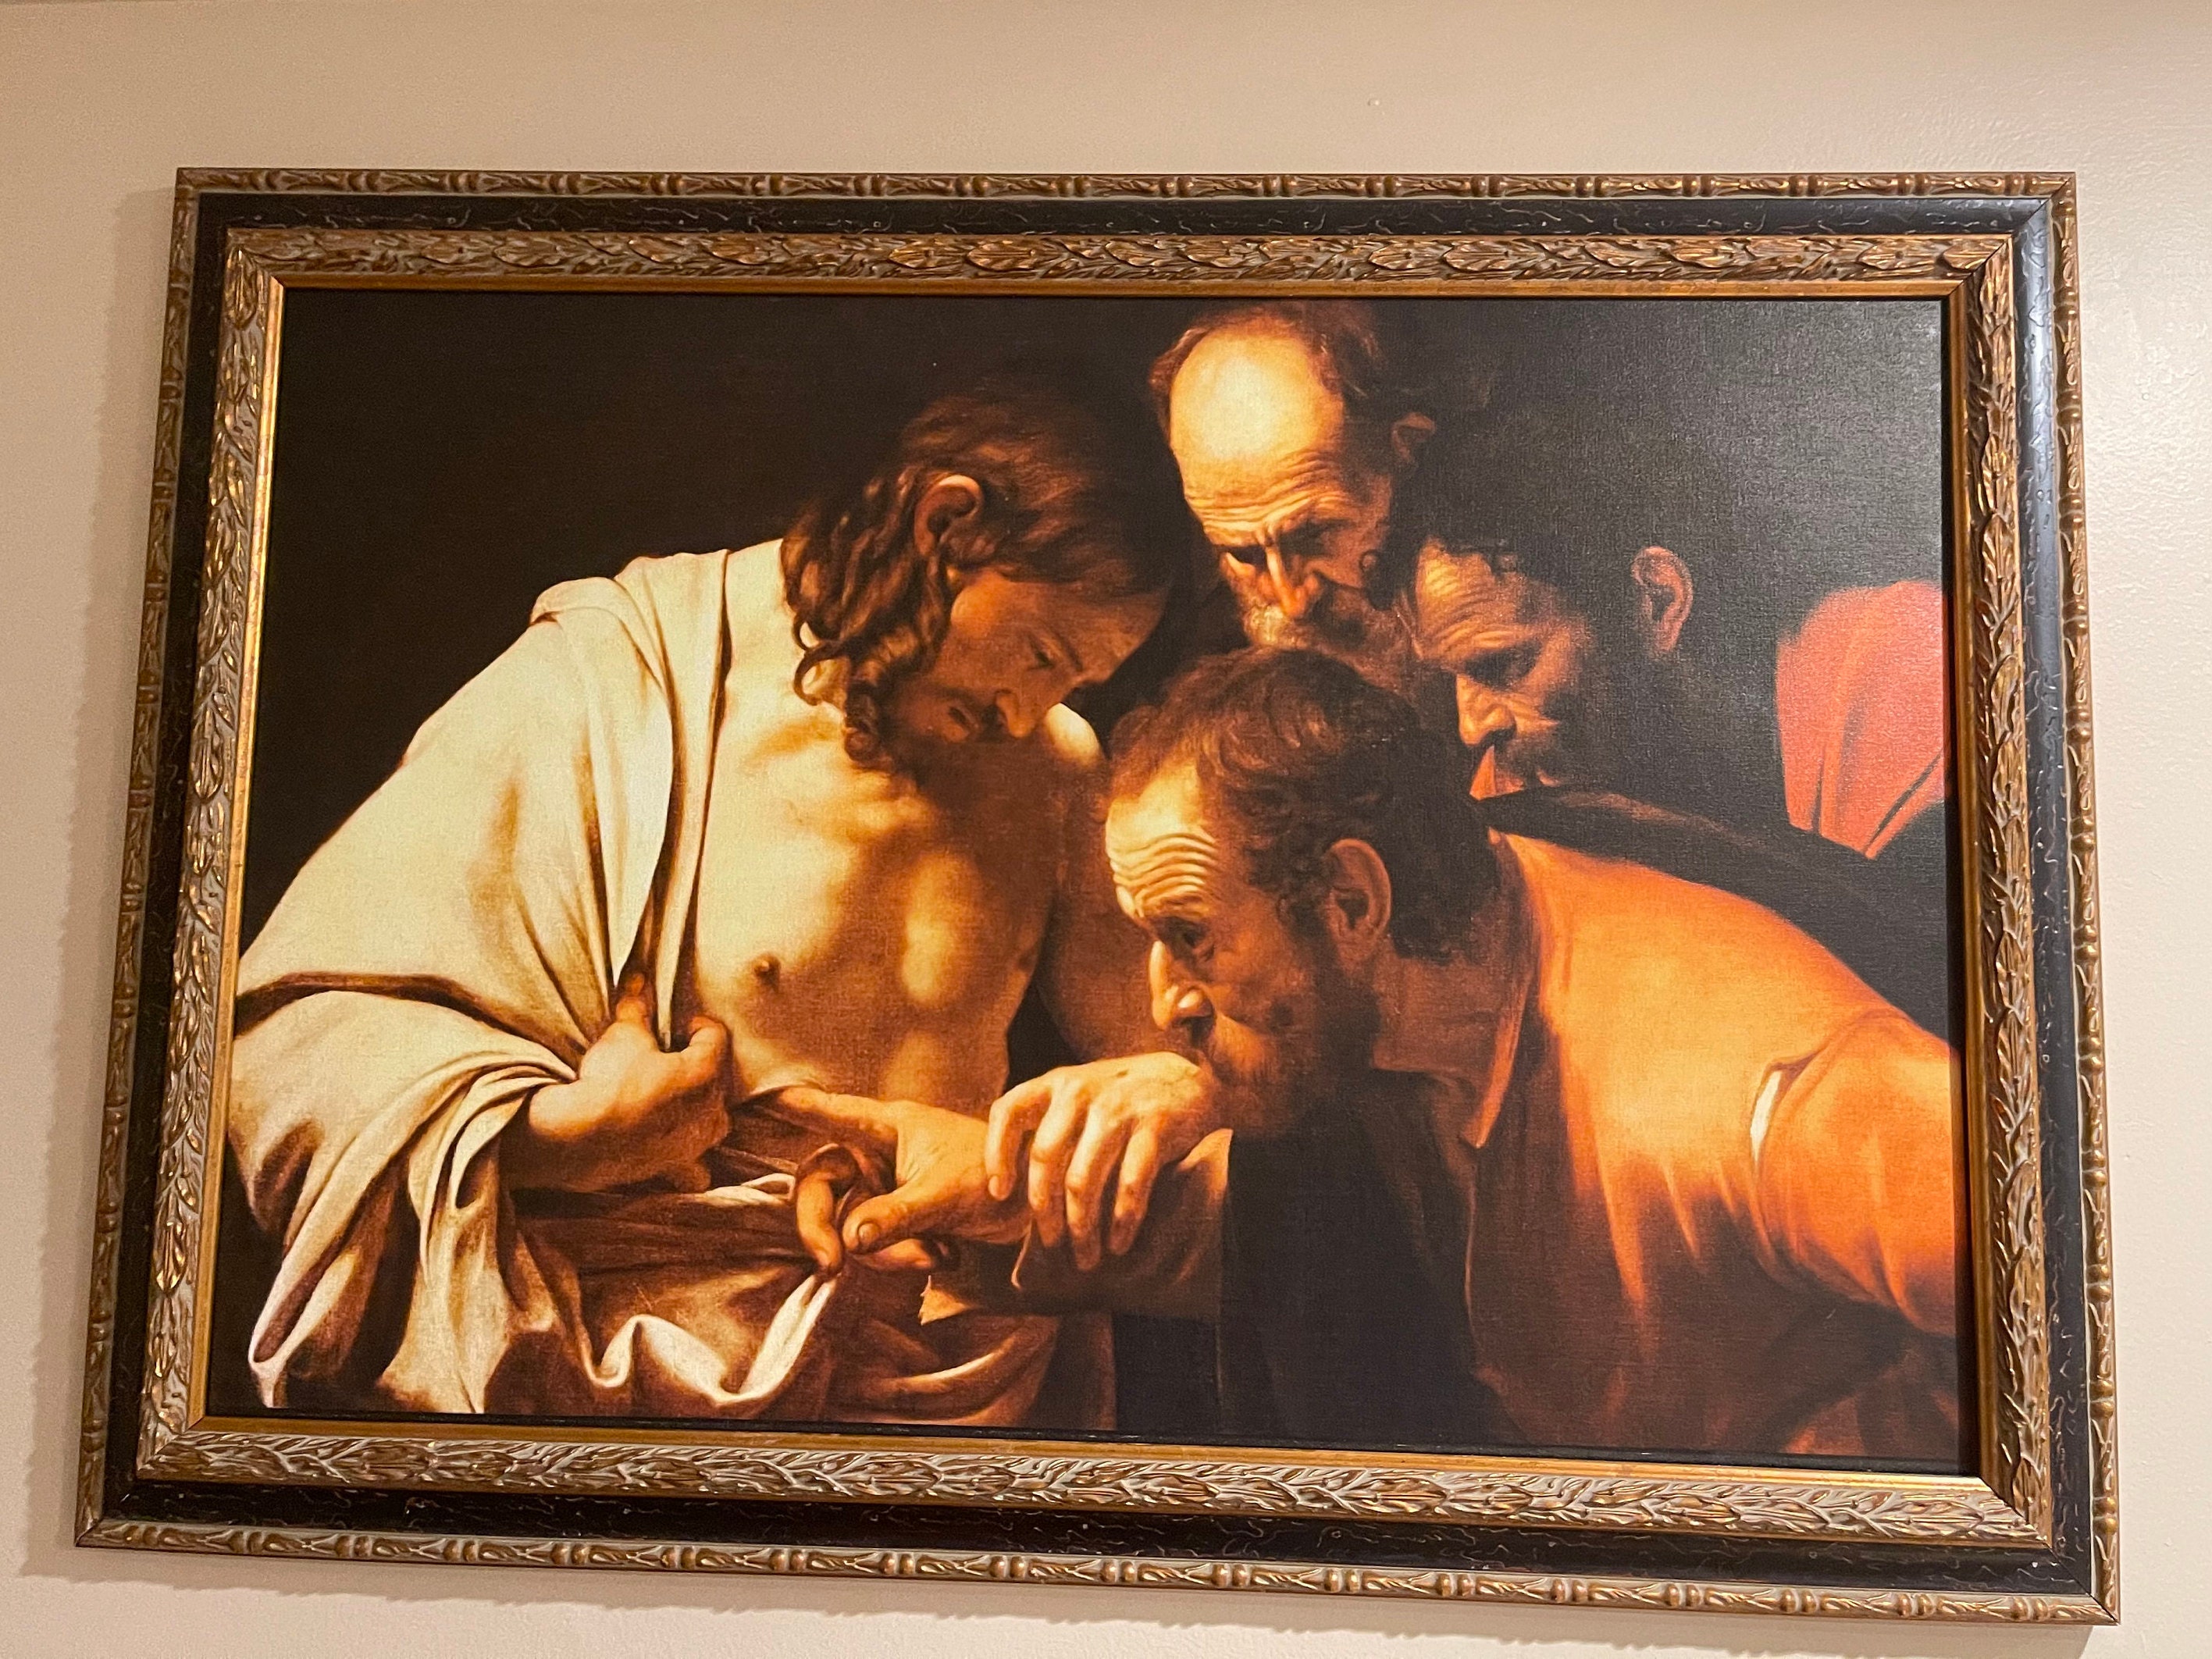 7. "The Incredulity of Saint Thomas" by Caravaggio - wide 1